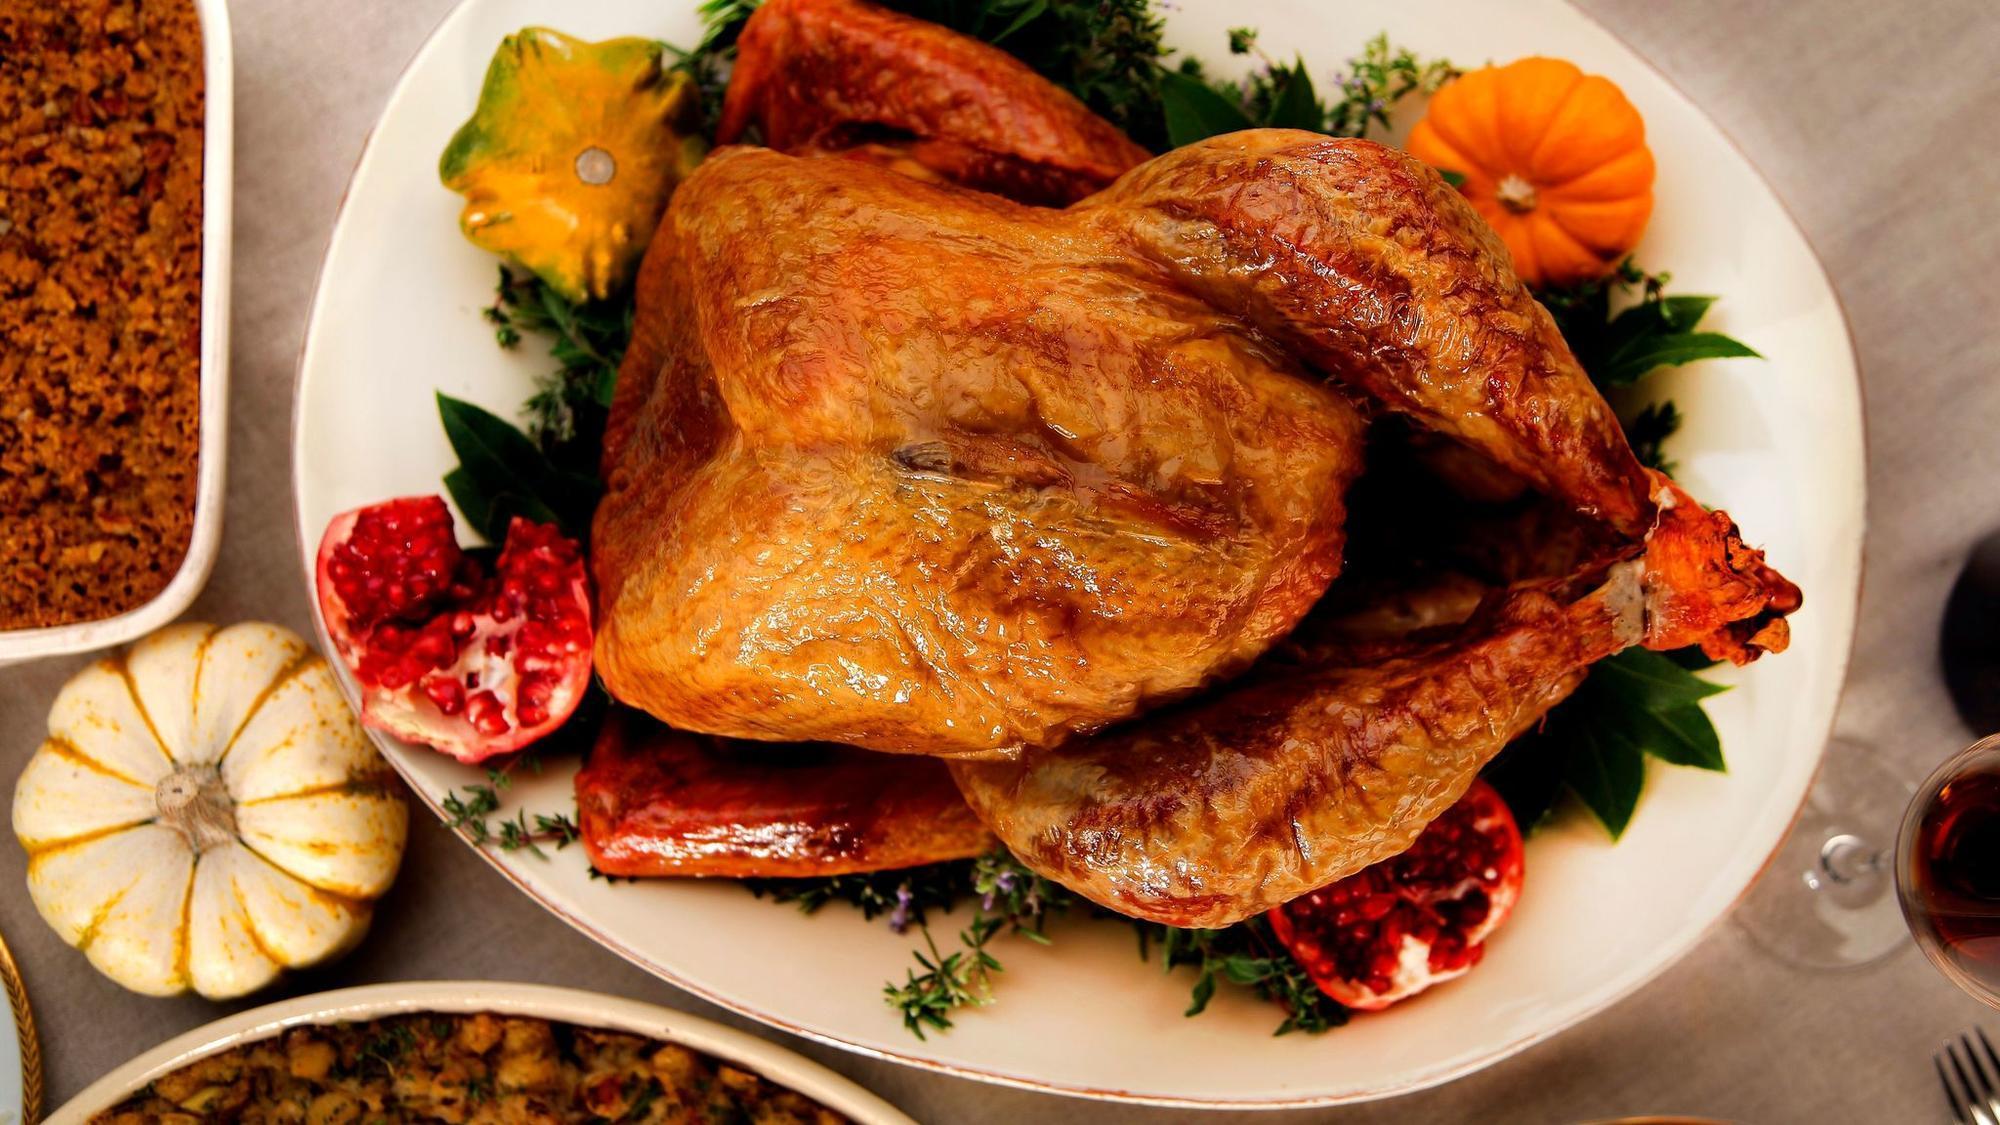 From Prep To Plate: How To Cook A Delicious Turkey Every Time